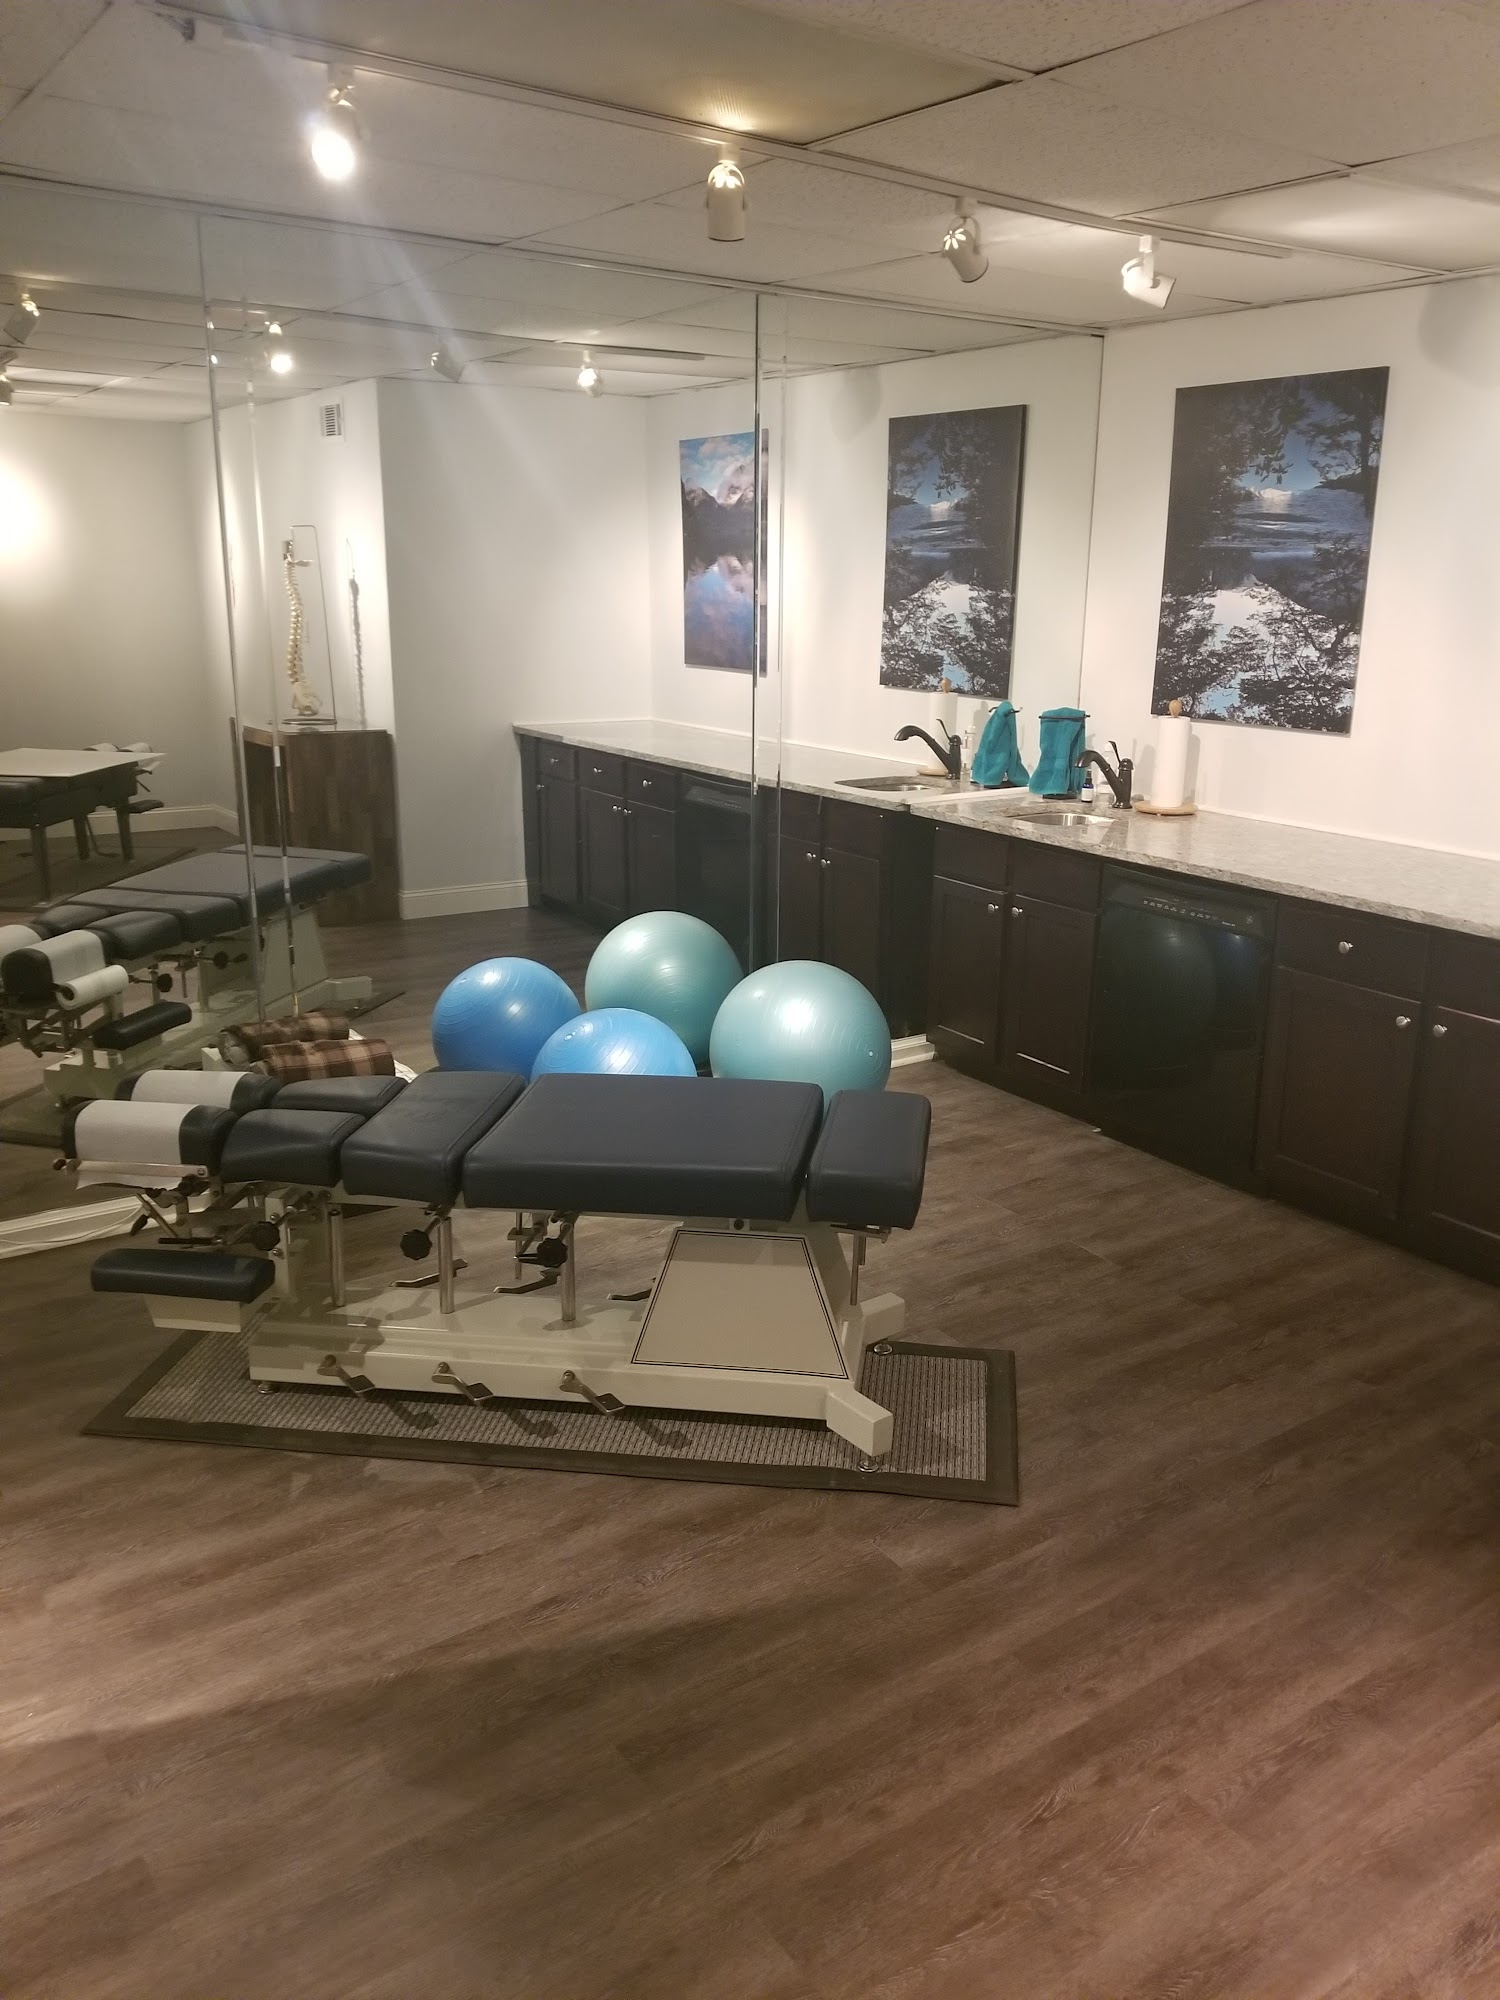 Hands On Wellness Chiropractic and Hyperbaric Oxygen Therapy